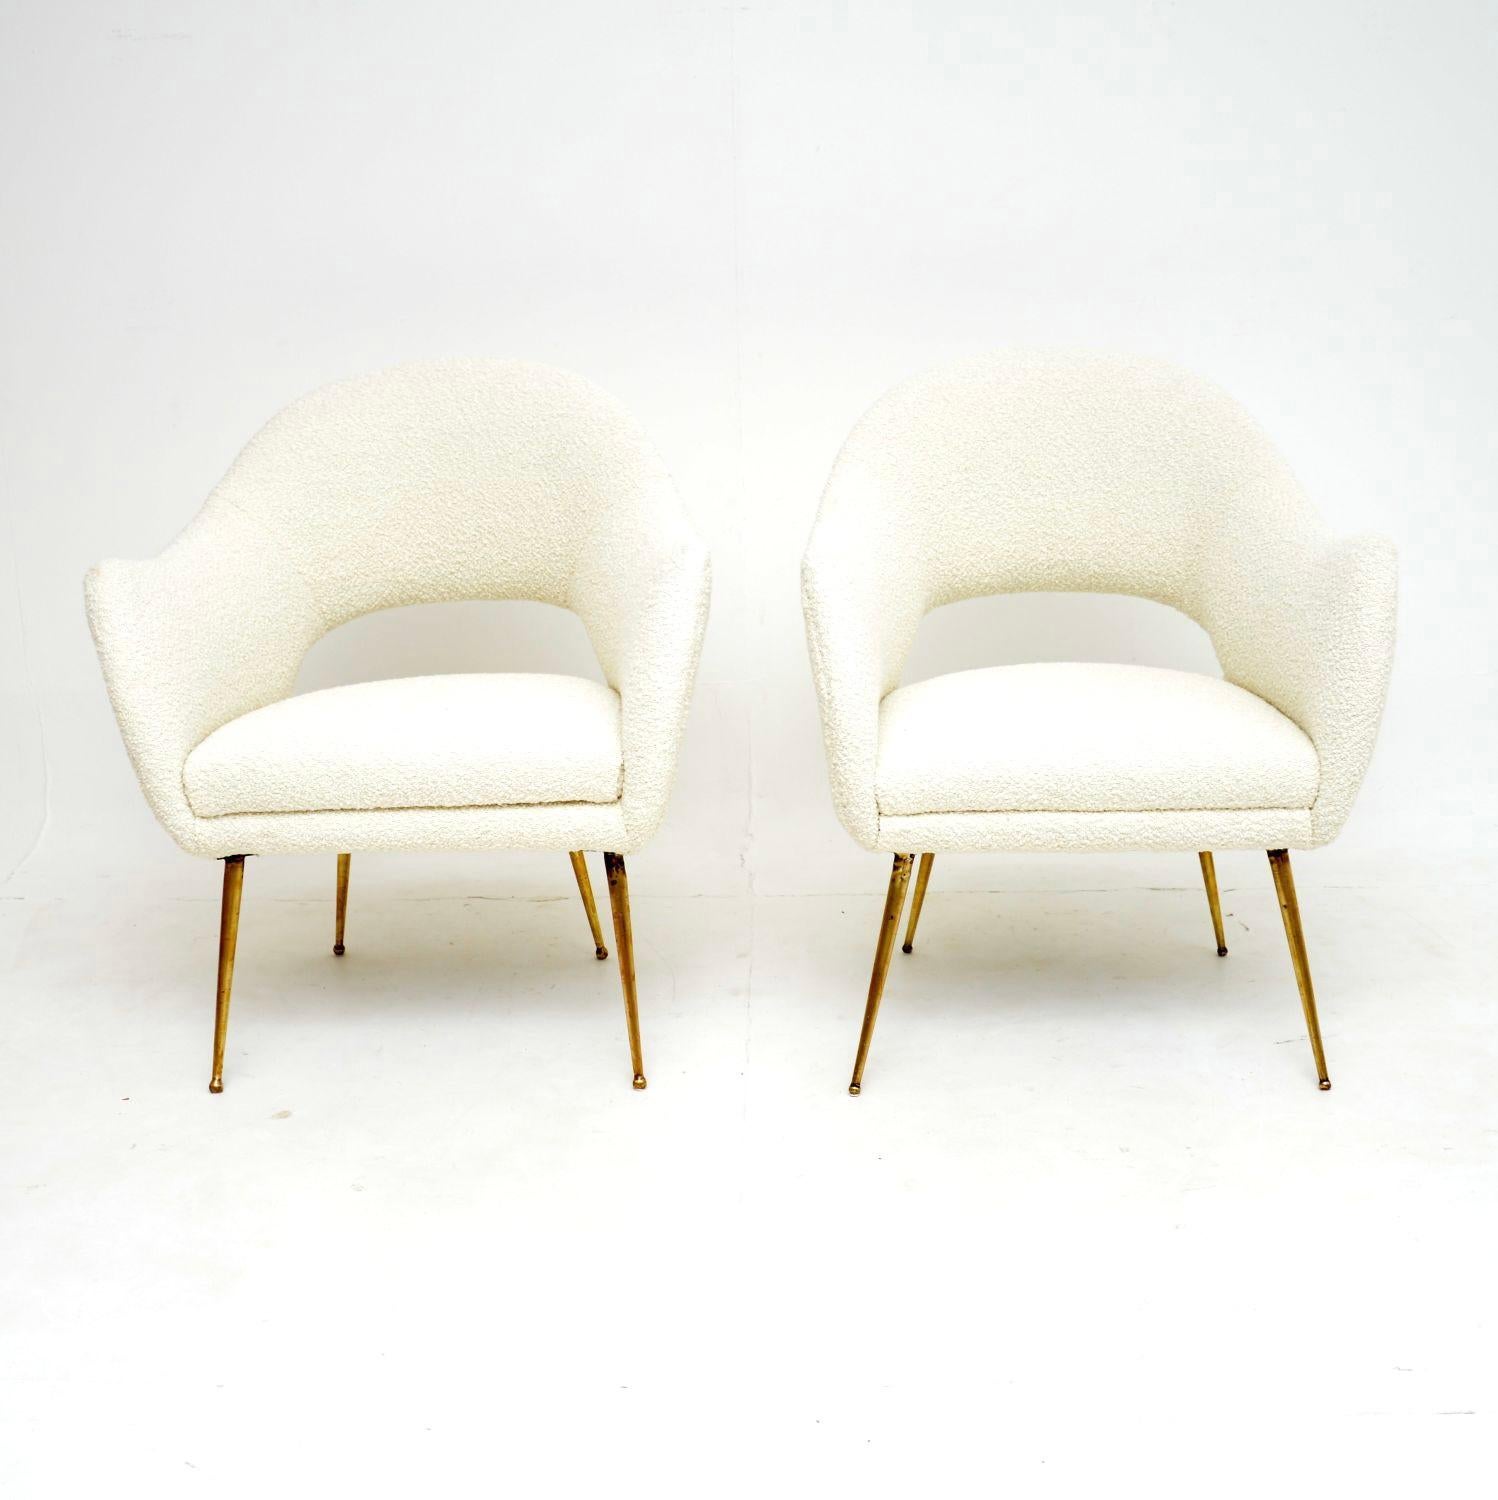 A stunning pair of vintage Italian armchairs in boucle wool and brass. They were recently imported from Italy, and they date from the 1960’s.

They are a lovely size, beautifully designed and are of great quality. The scooped seat frames sit on